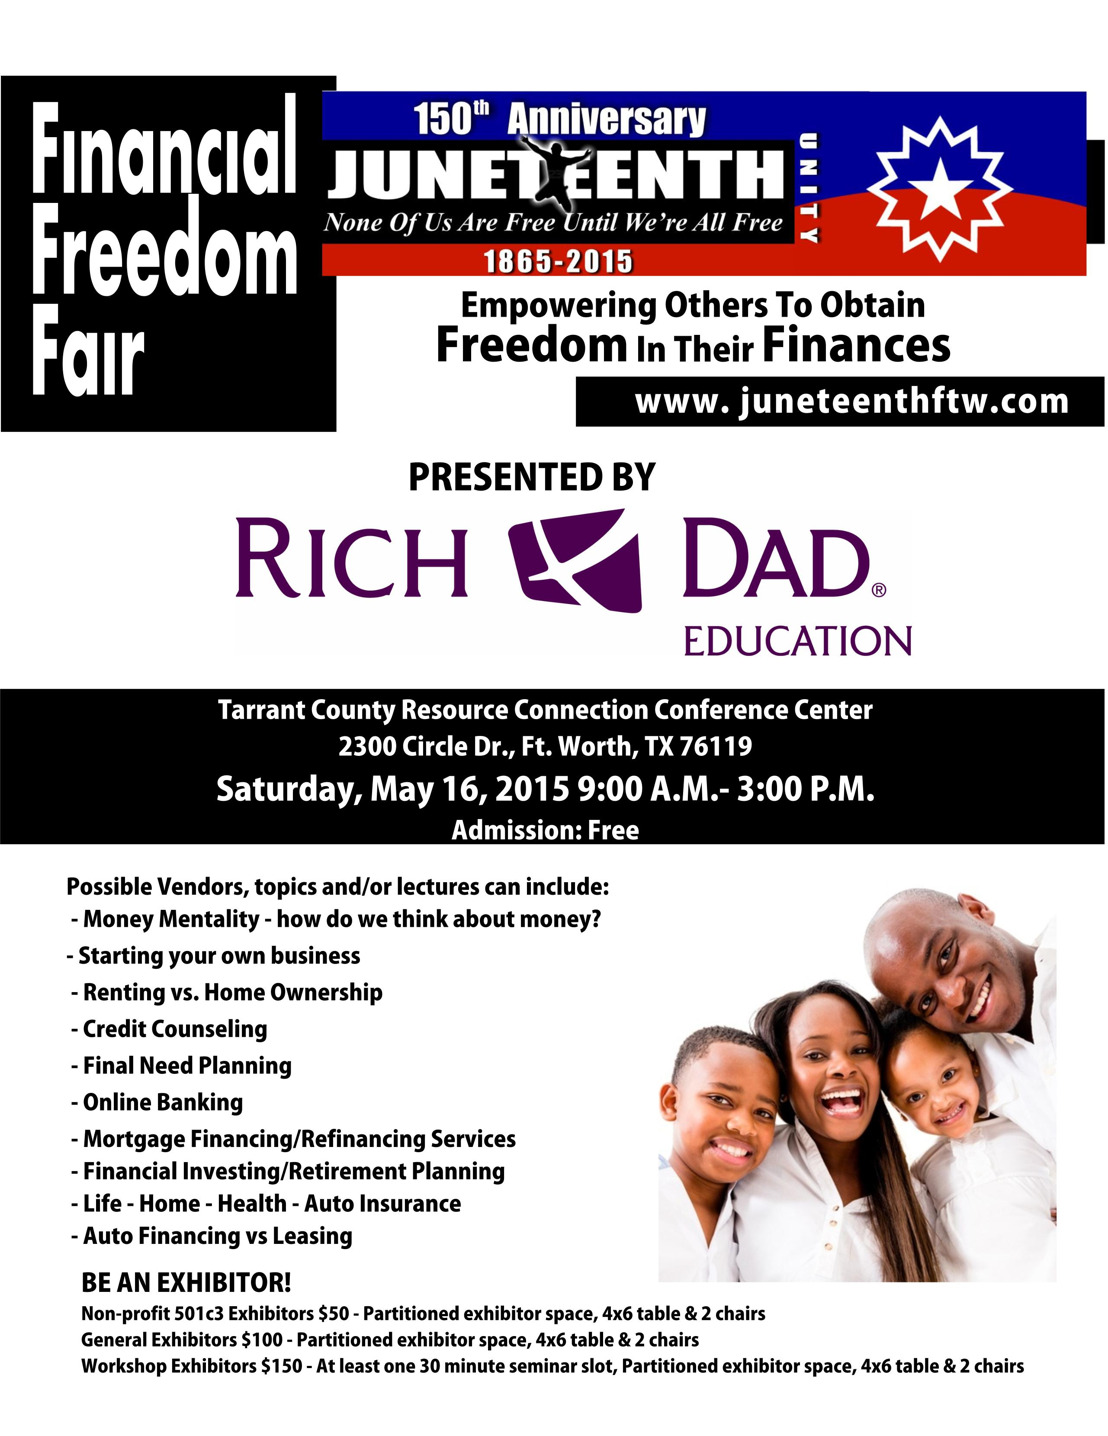 150th Juneteenth Anniversary Celebration Financial Freedom Fair Presented by Rich Dad Education